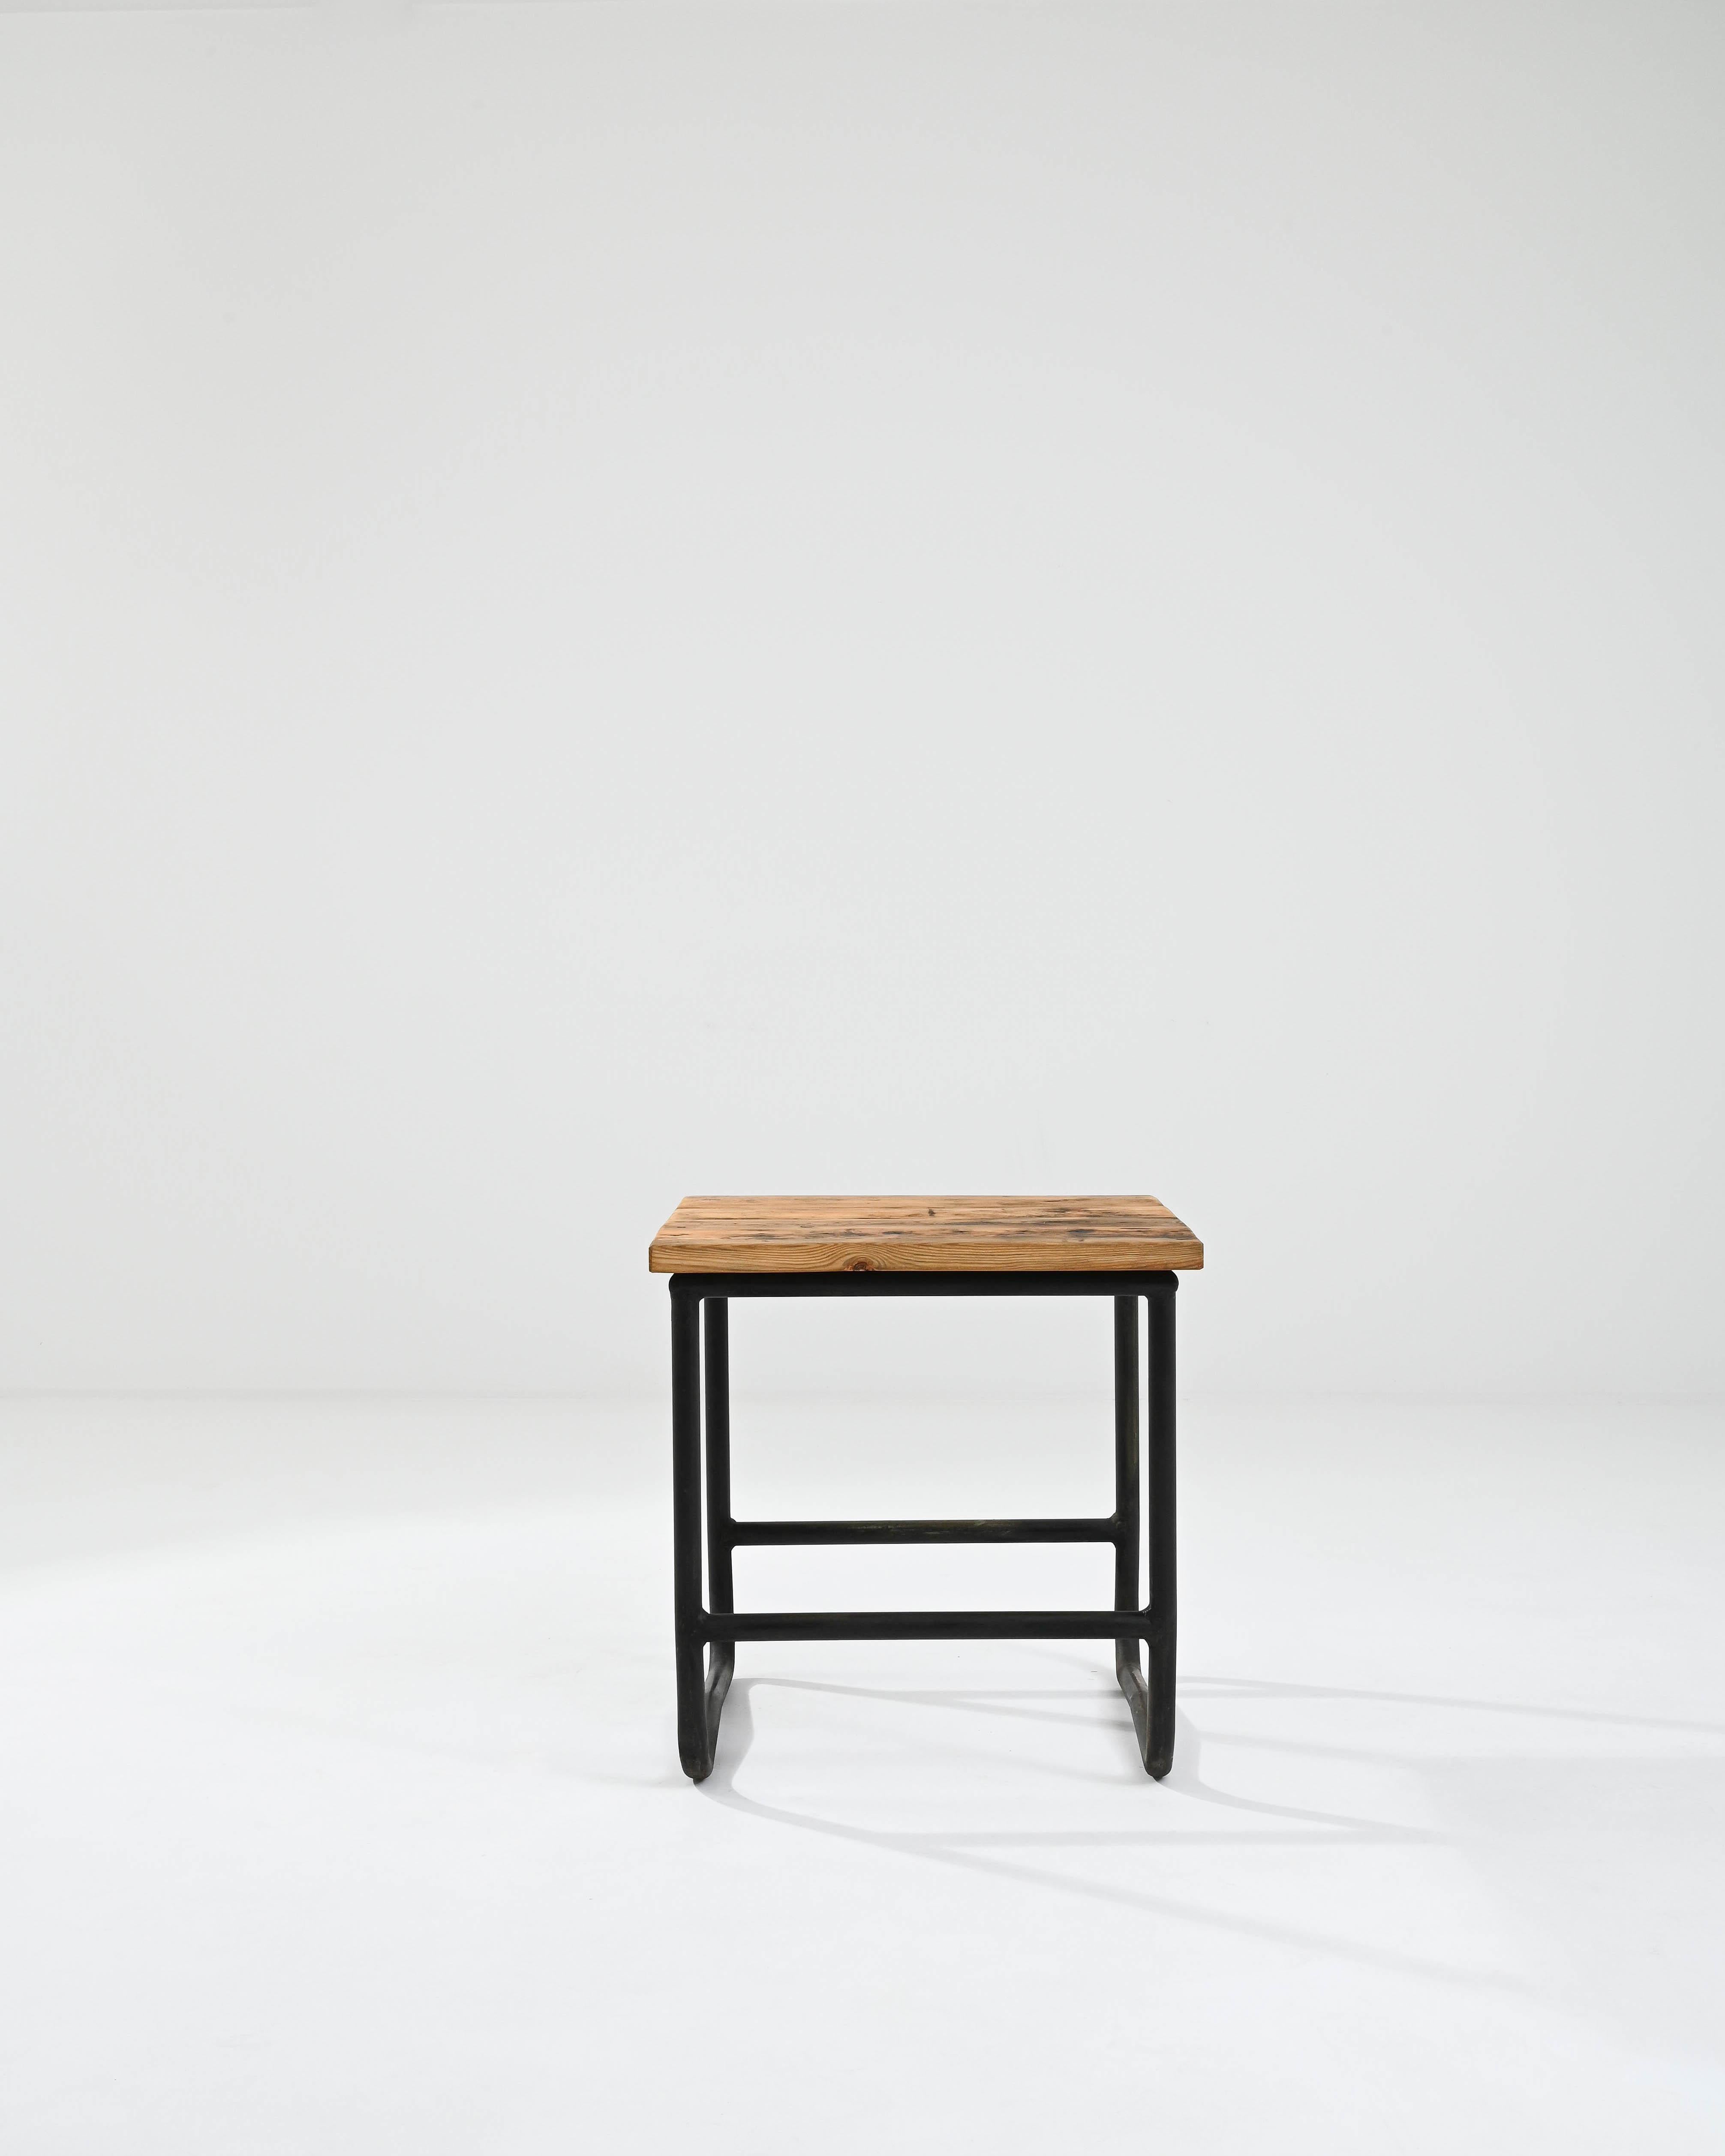 A metal side table with a wooden top made in 20th century central Europe. This stout and amicable side table greets one with a demeanor of an bold yet charmingly reliable companion. Black steel tubes have been welded together, with a subtle kink